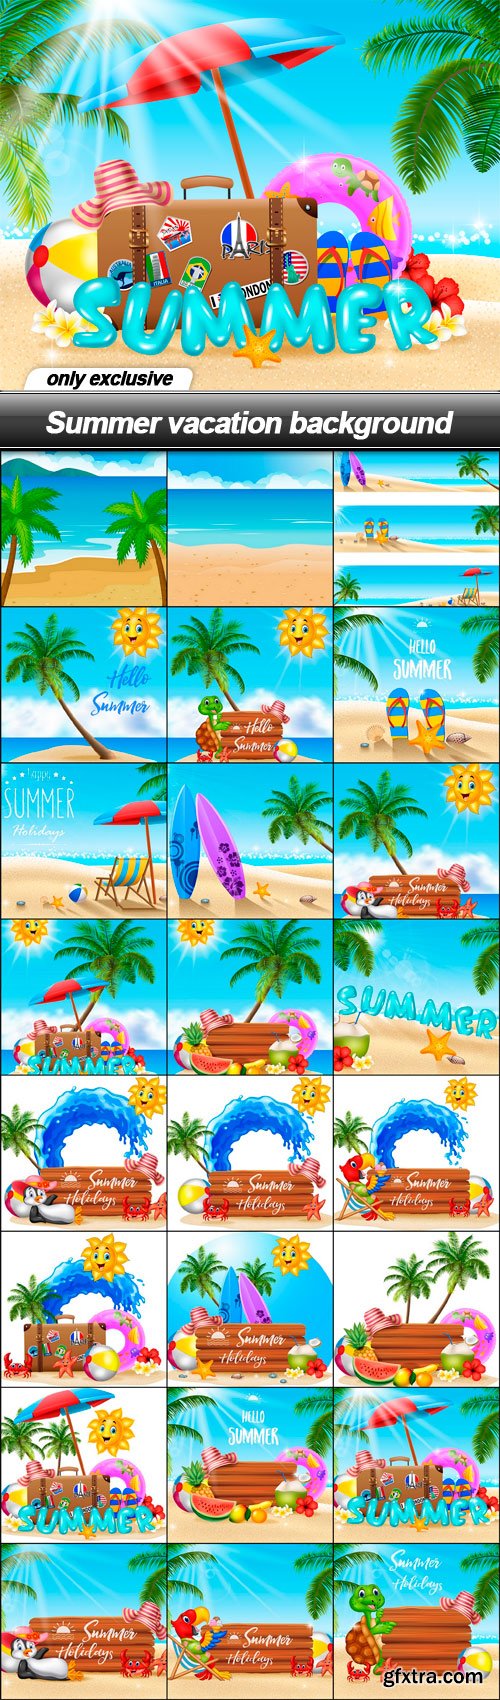 Summer vacation background - 24 EPS